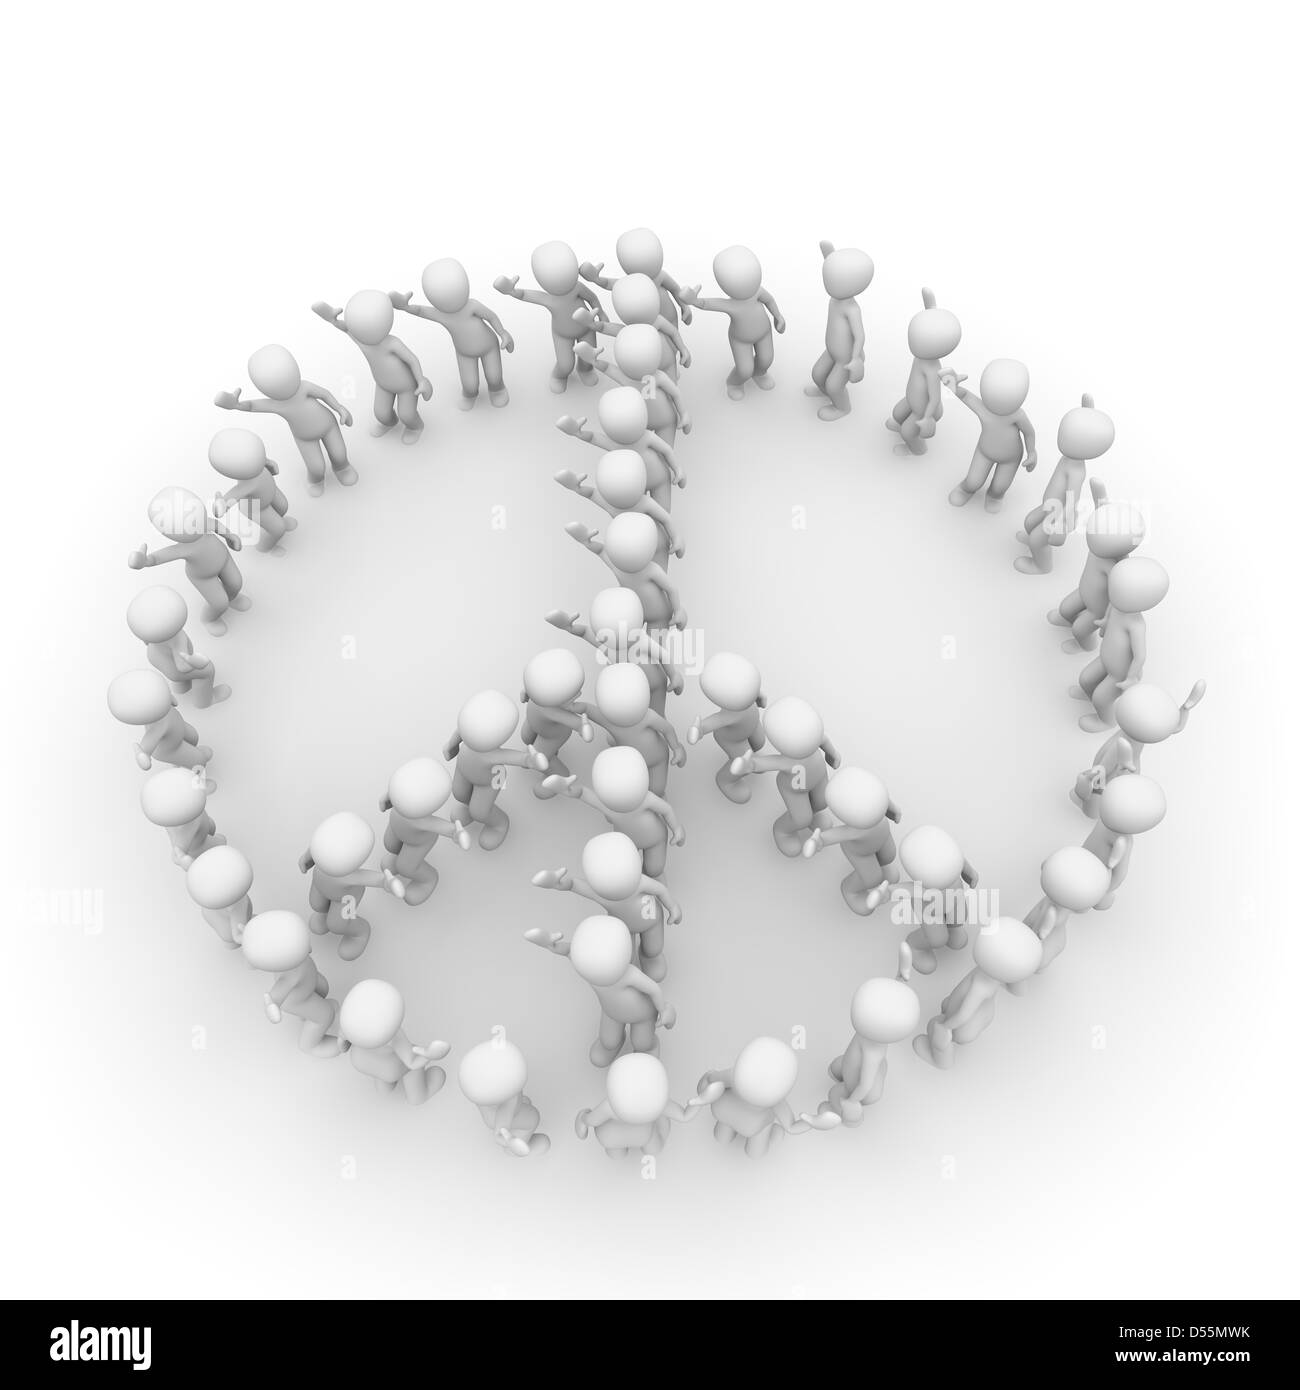 Peace is the greatest desire of many people on the planet earth Stock Photo